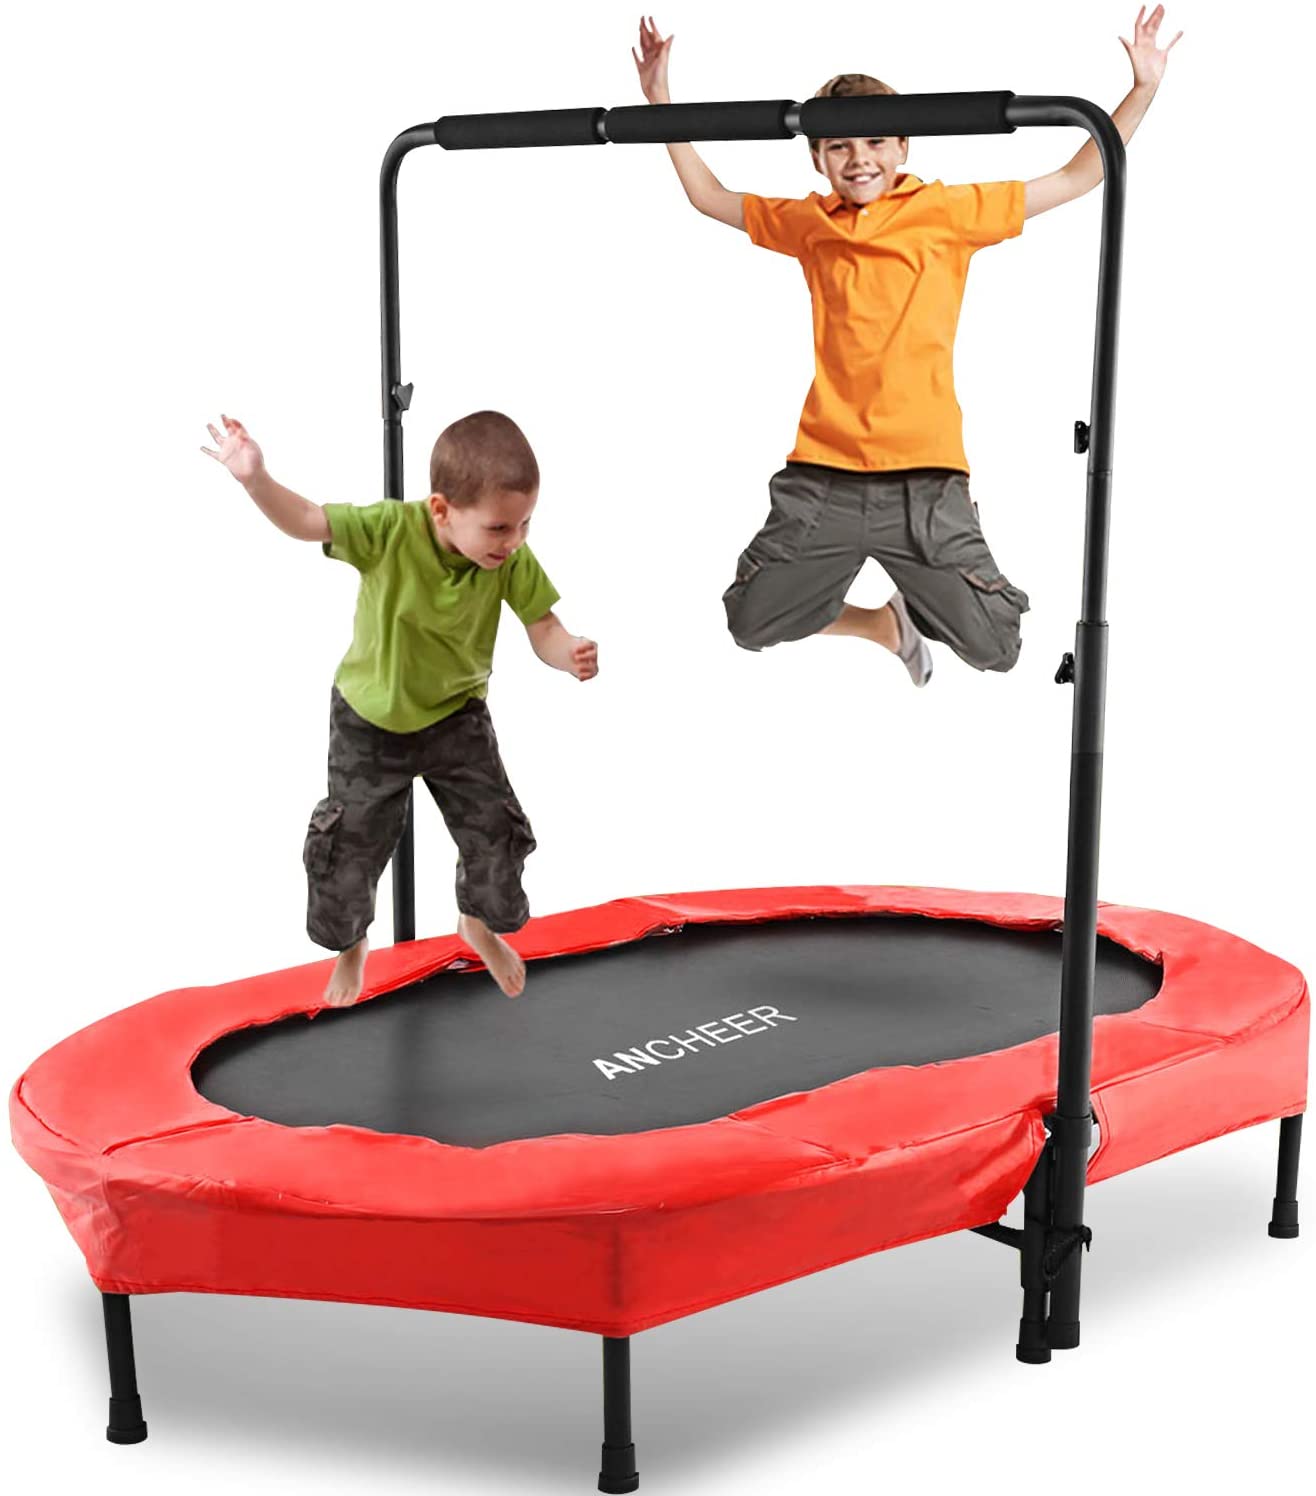 ANCHEER Mini Trampoline for Two Kids Review